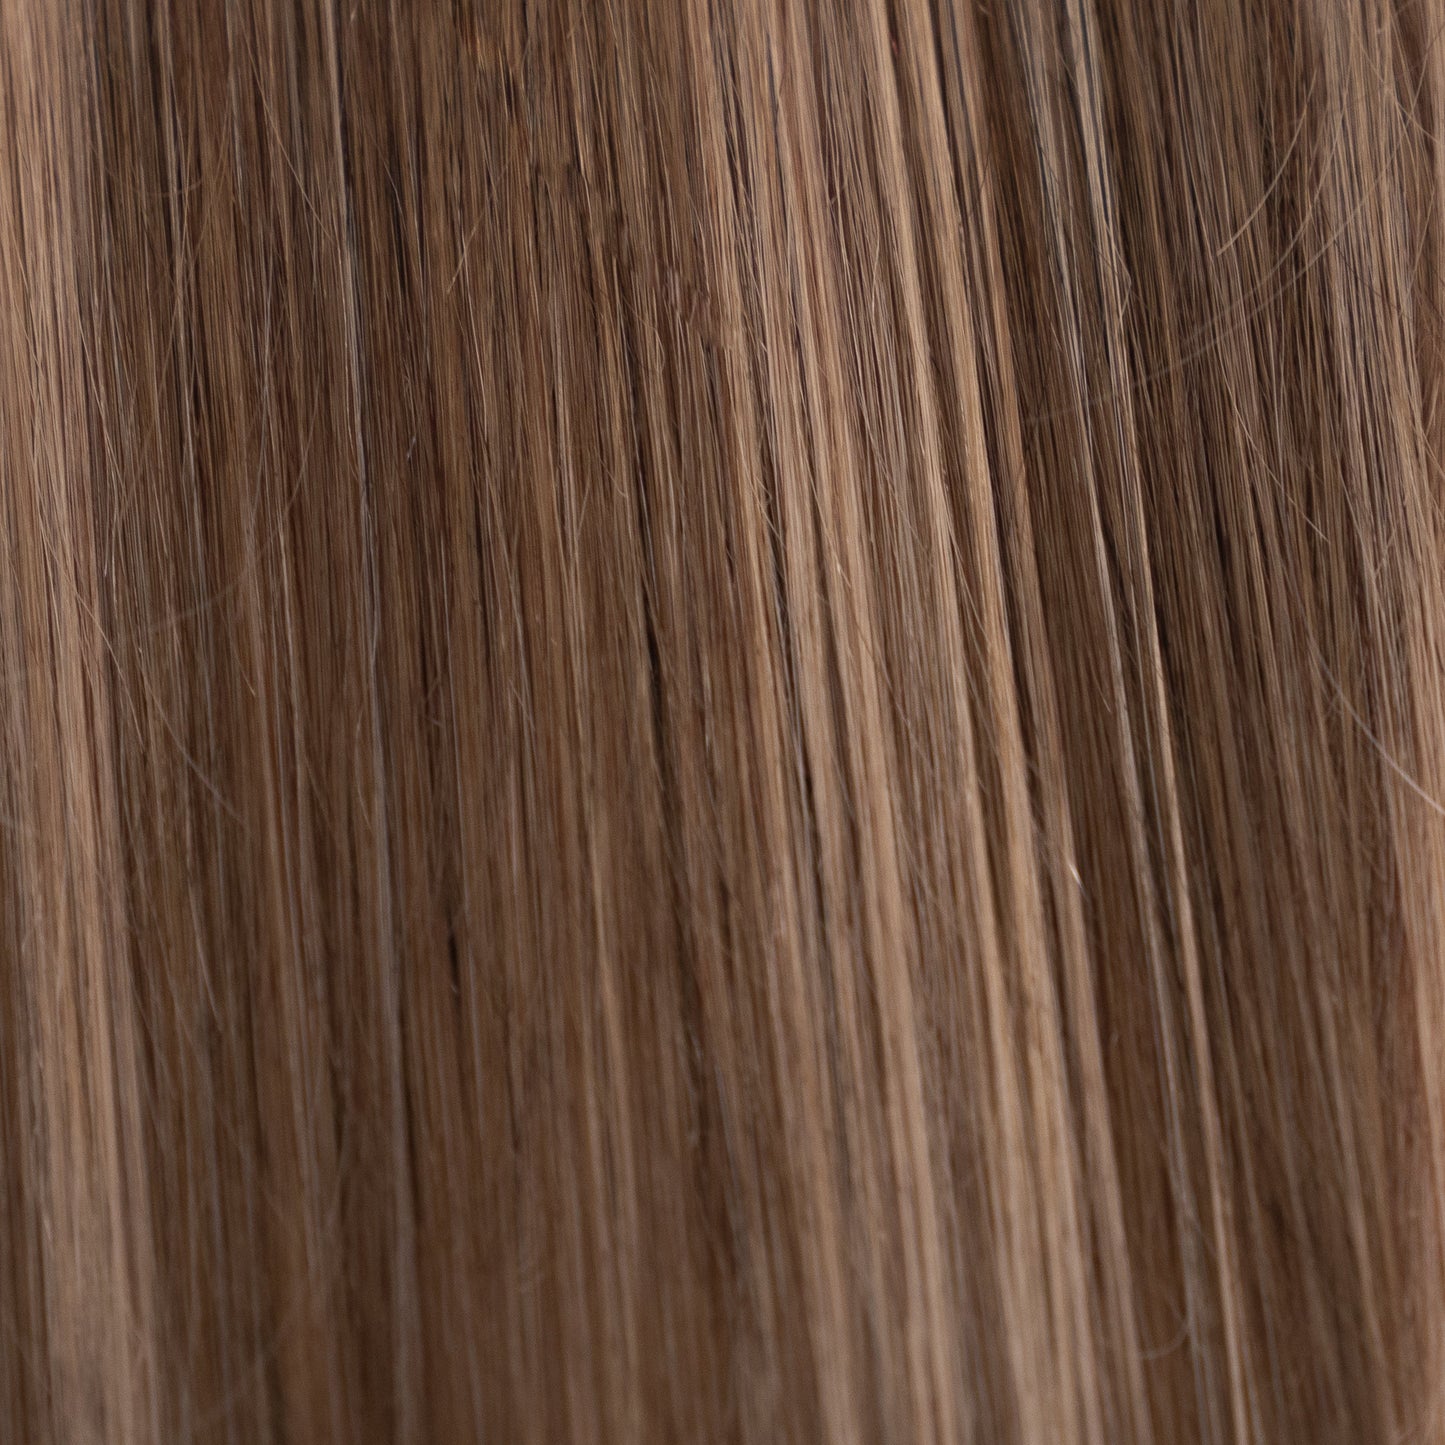 Genius (Micro) Weft 16" 60g Professional Hair Extensions - #4/27 Highlight Chocolate Brown